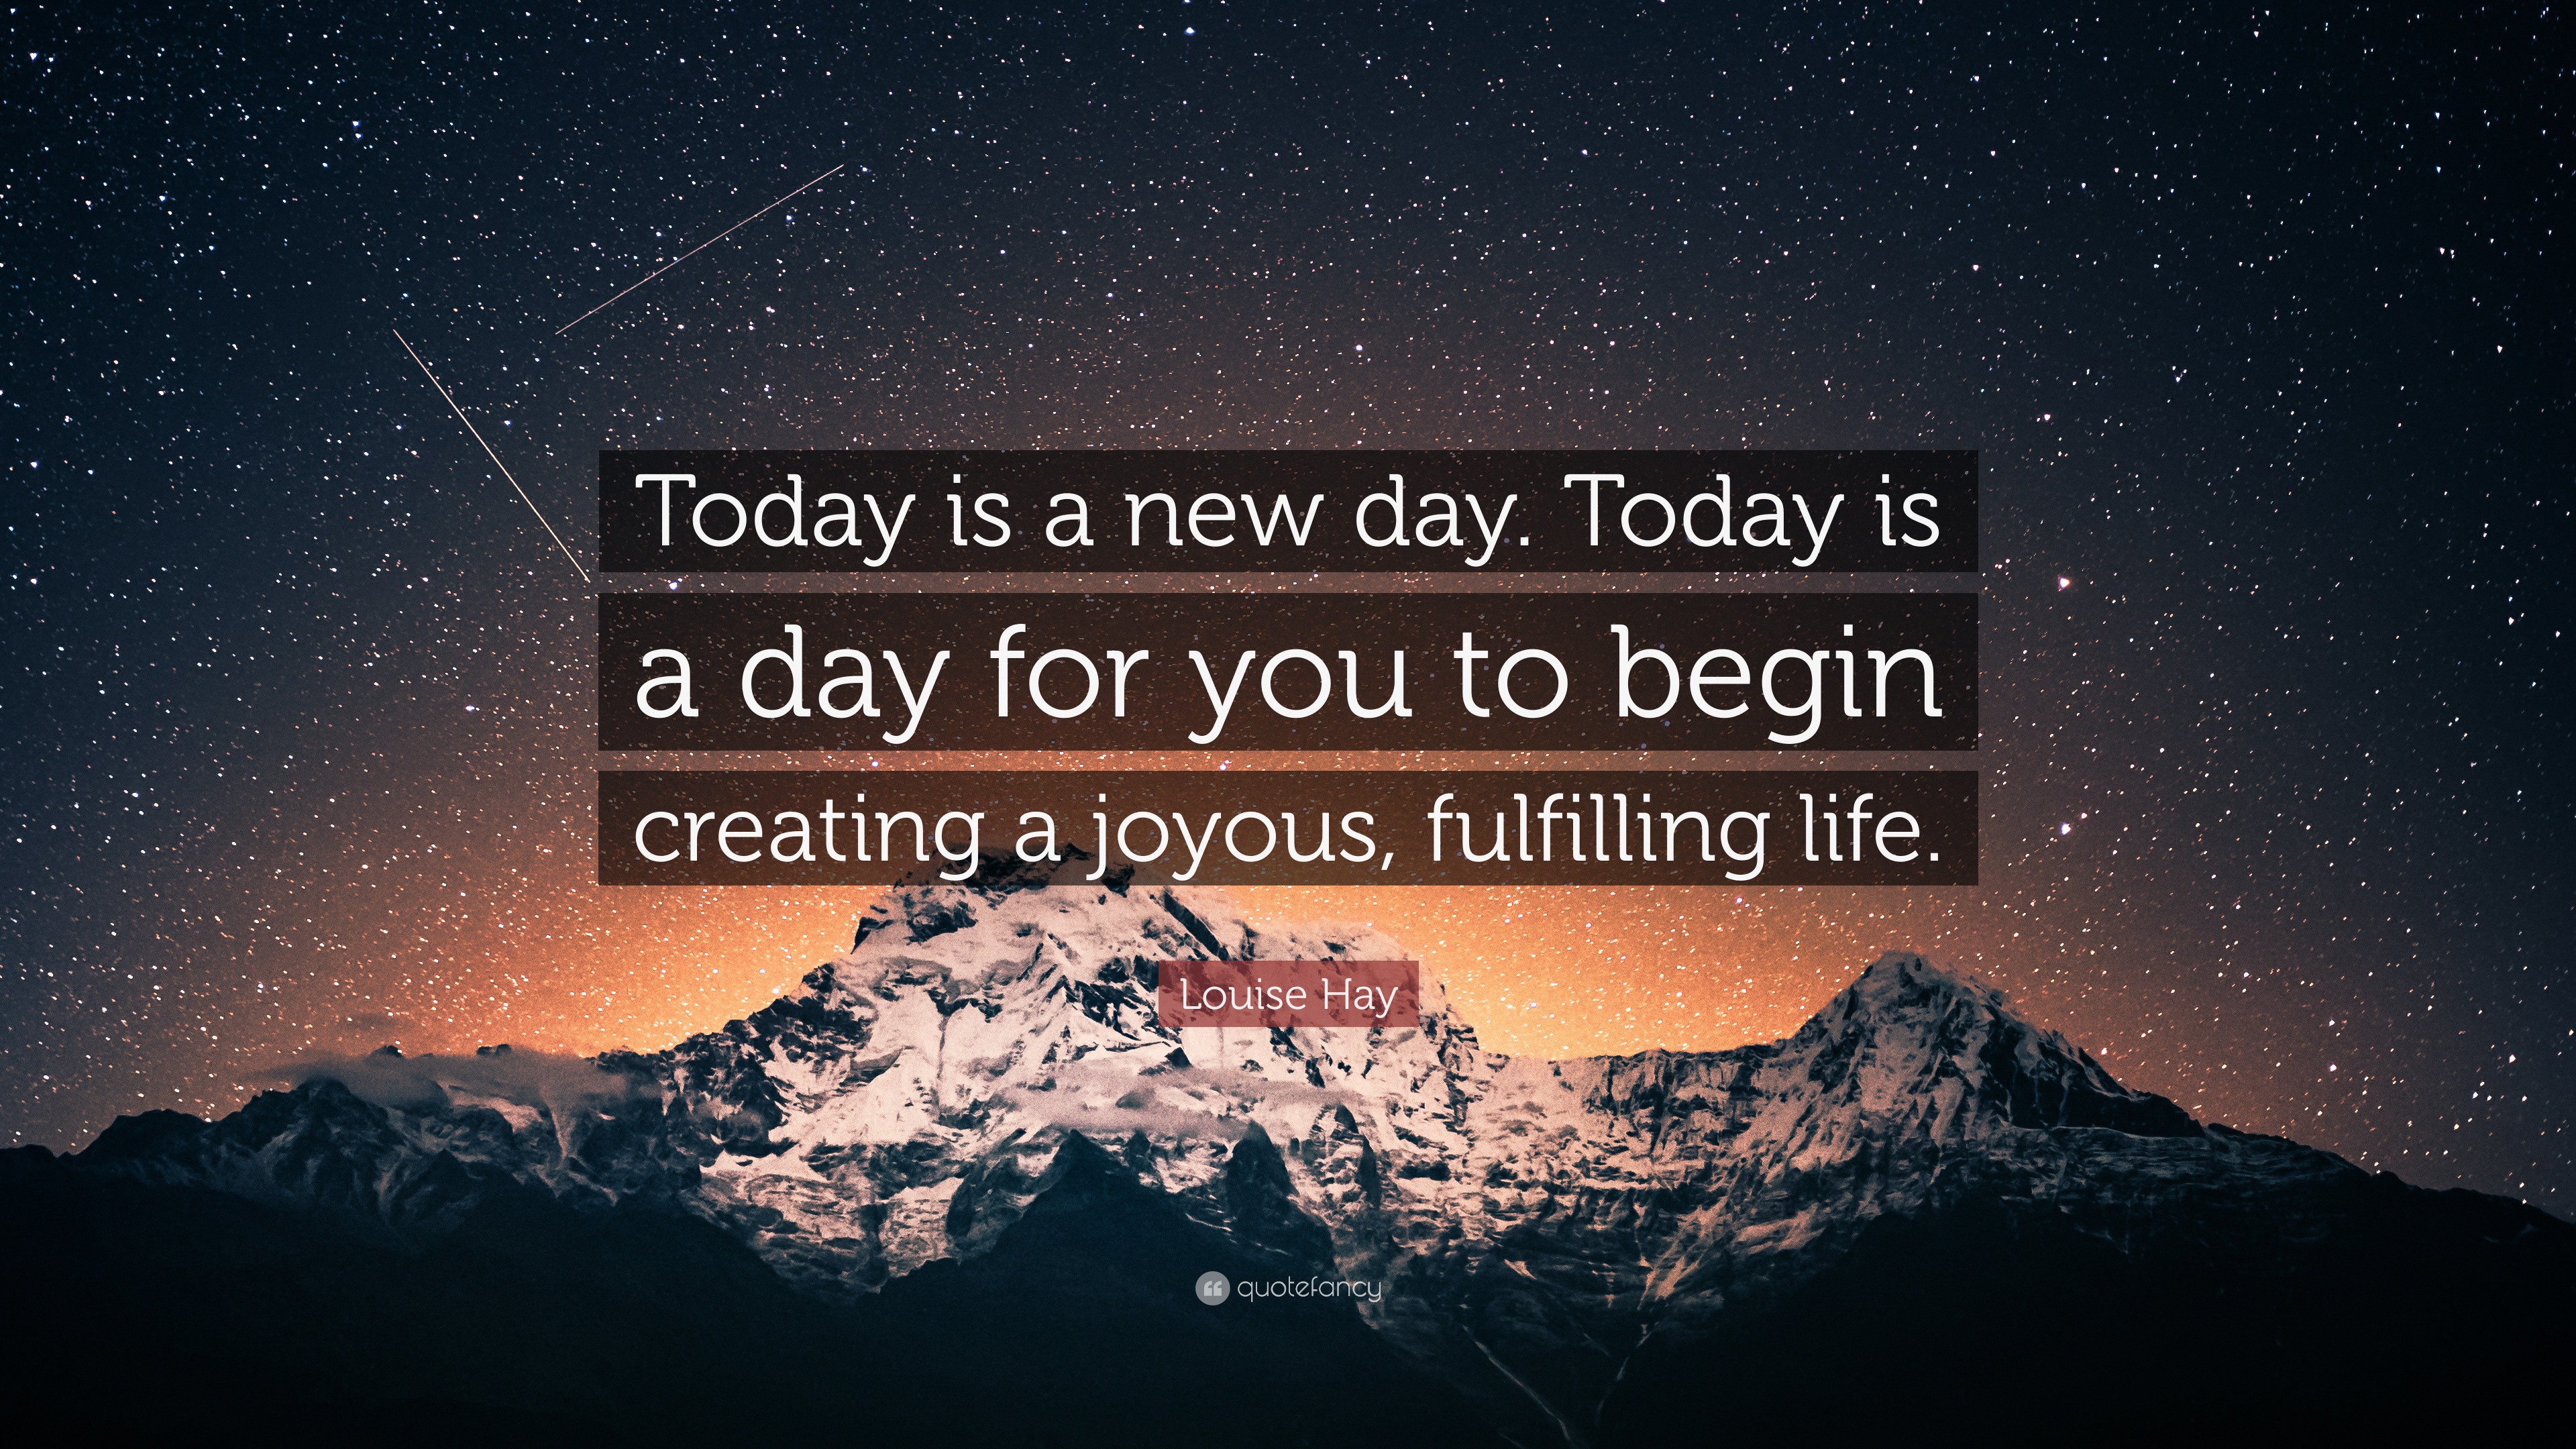 louise-hay-quote-today-is-a-new-day-today-is-a-day-for-you-to-begin